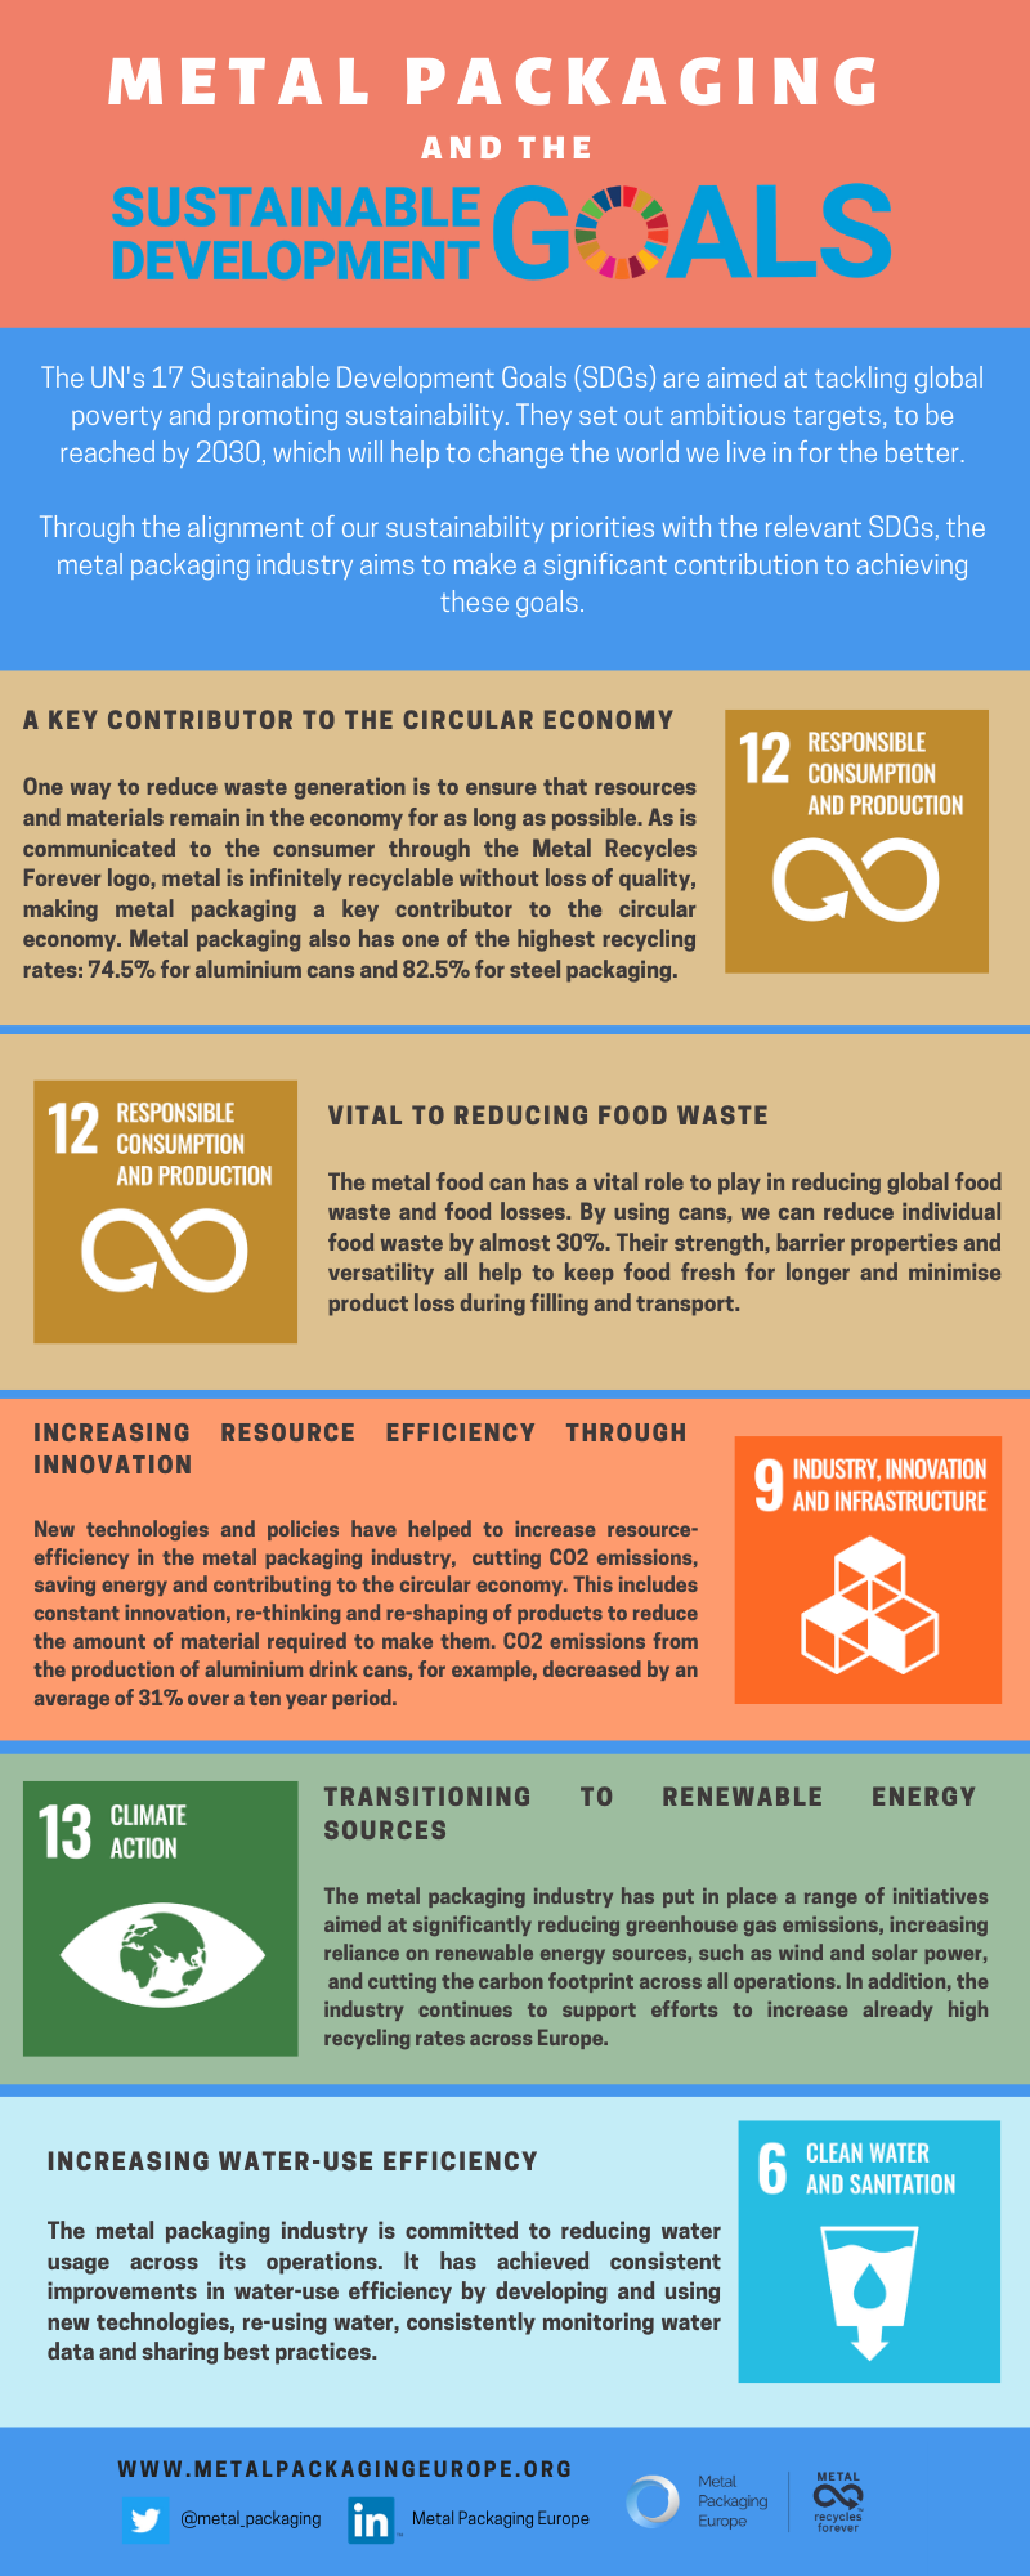 Metal Packaging and the UN Sustainable Development Goals